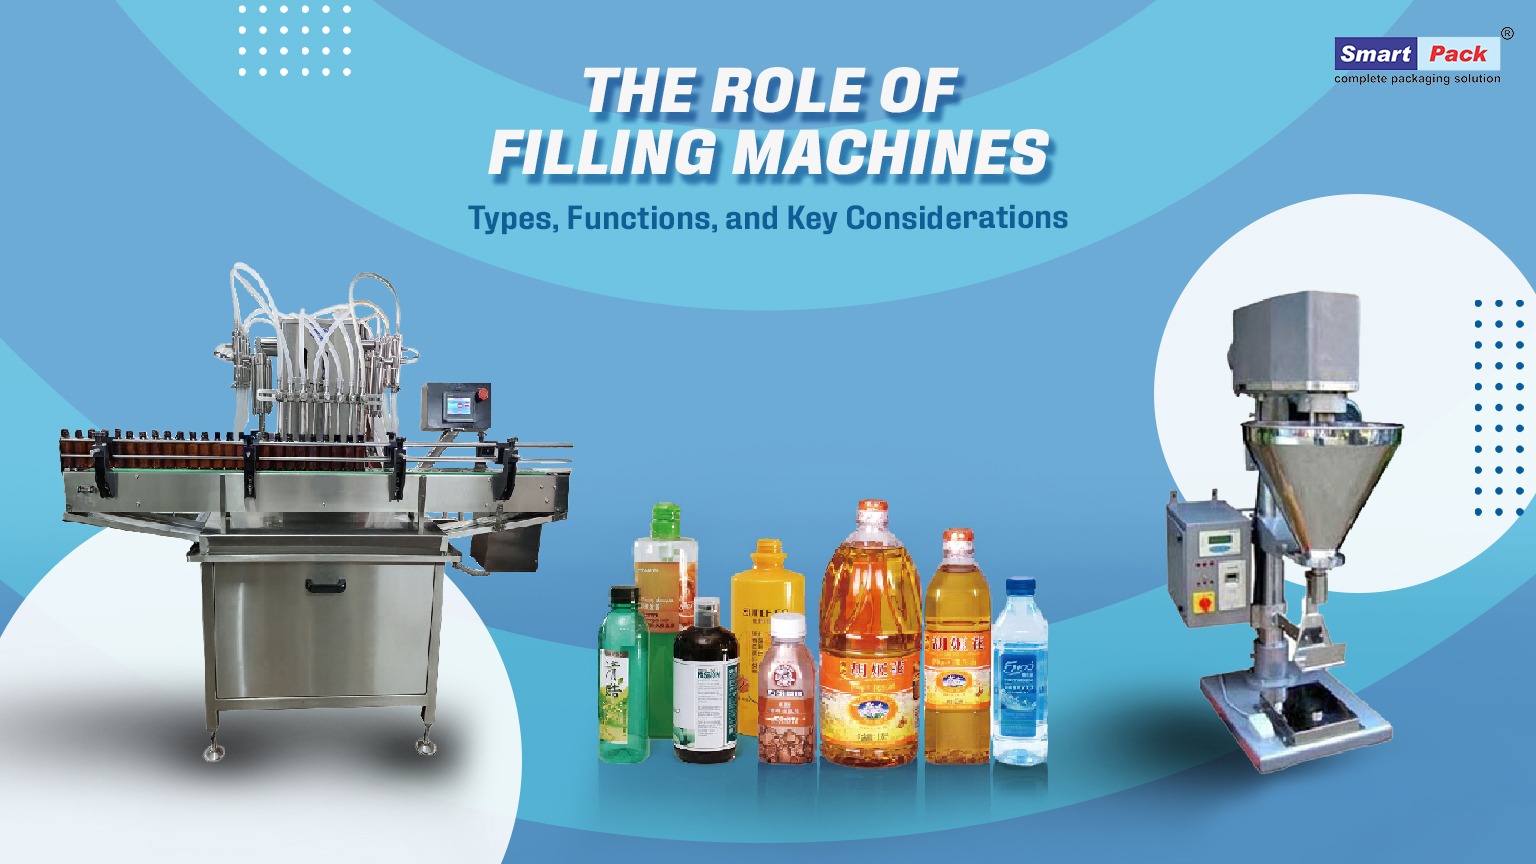 The Role of Filling Machines: Types, Functions, and Key Considerations